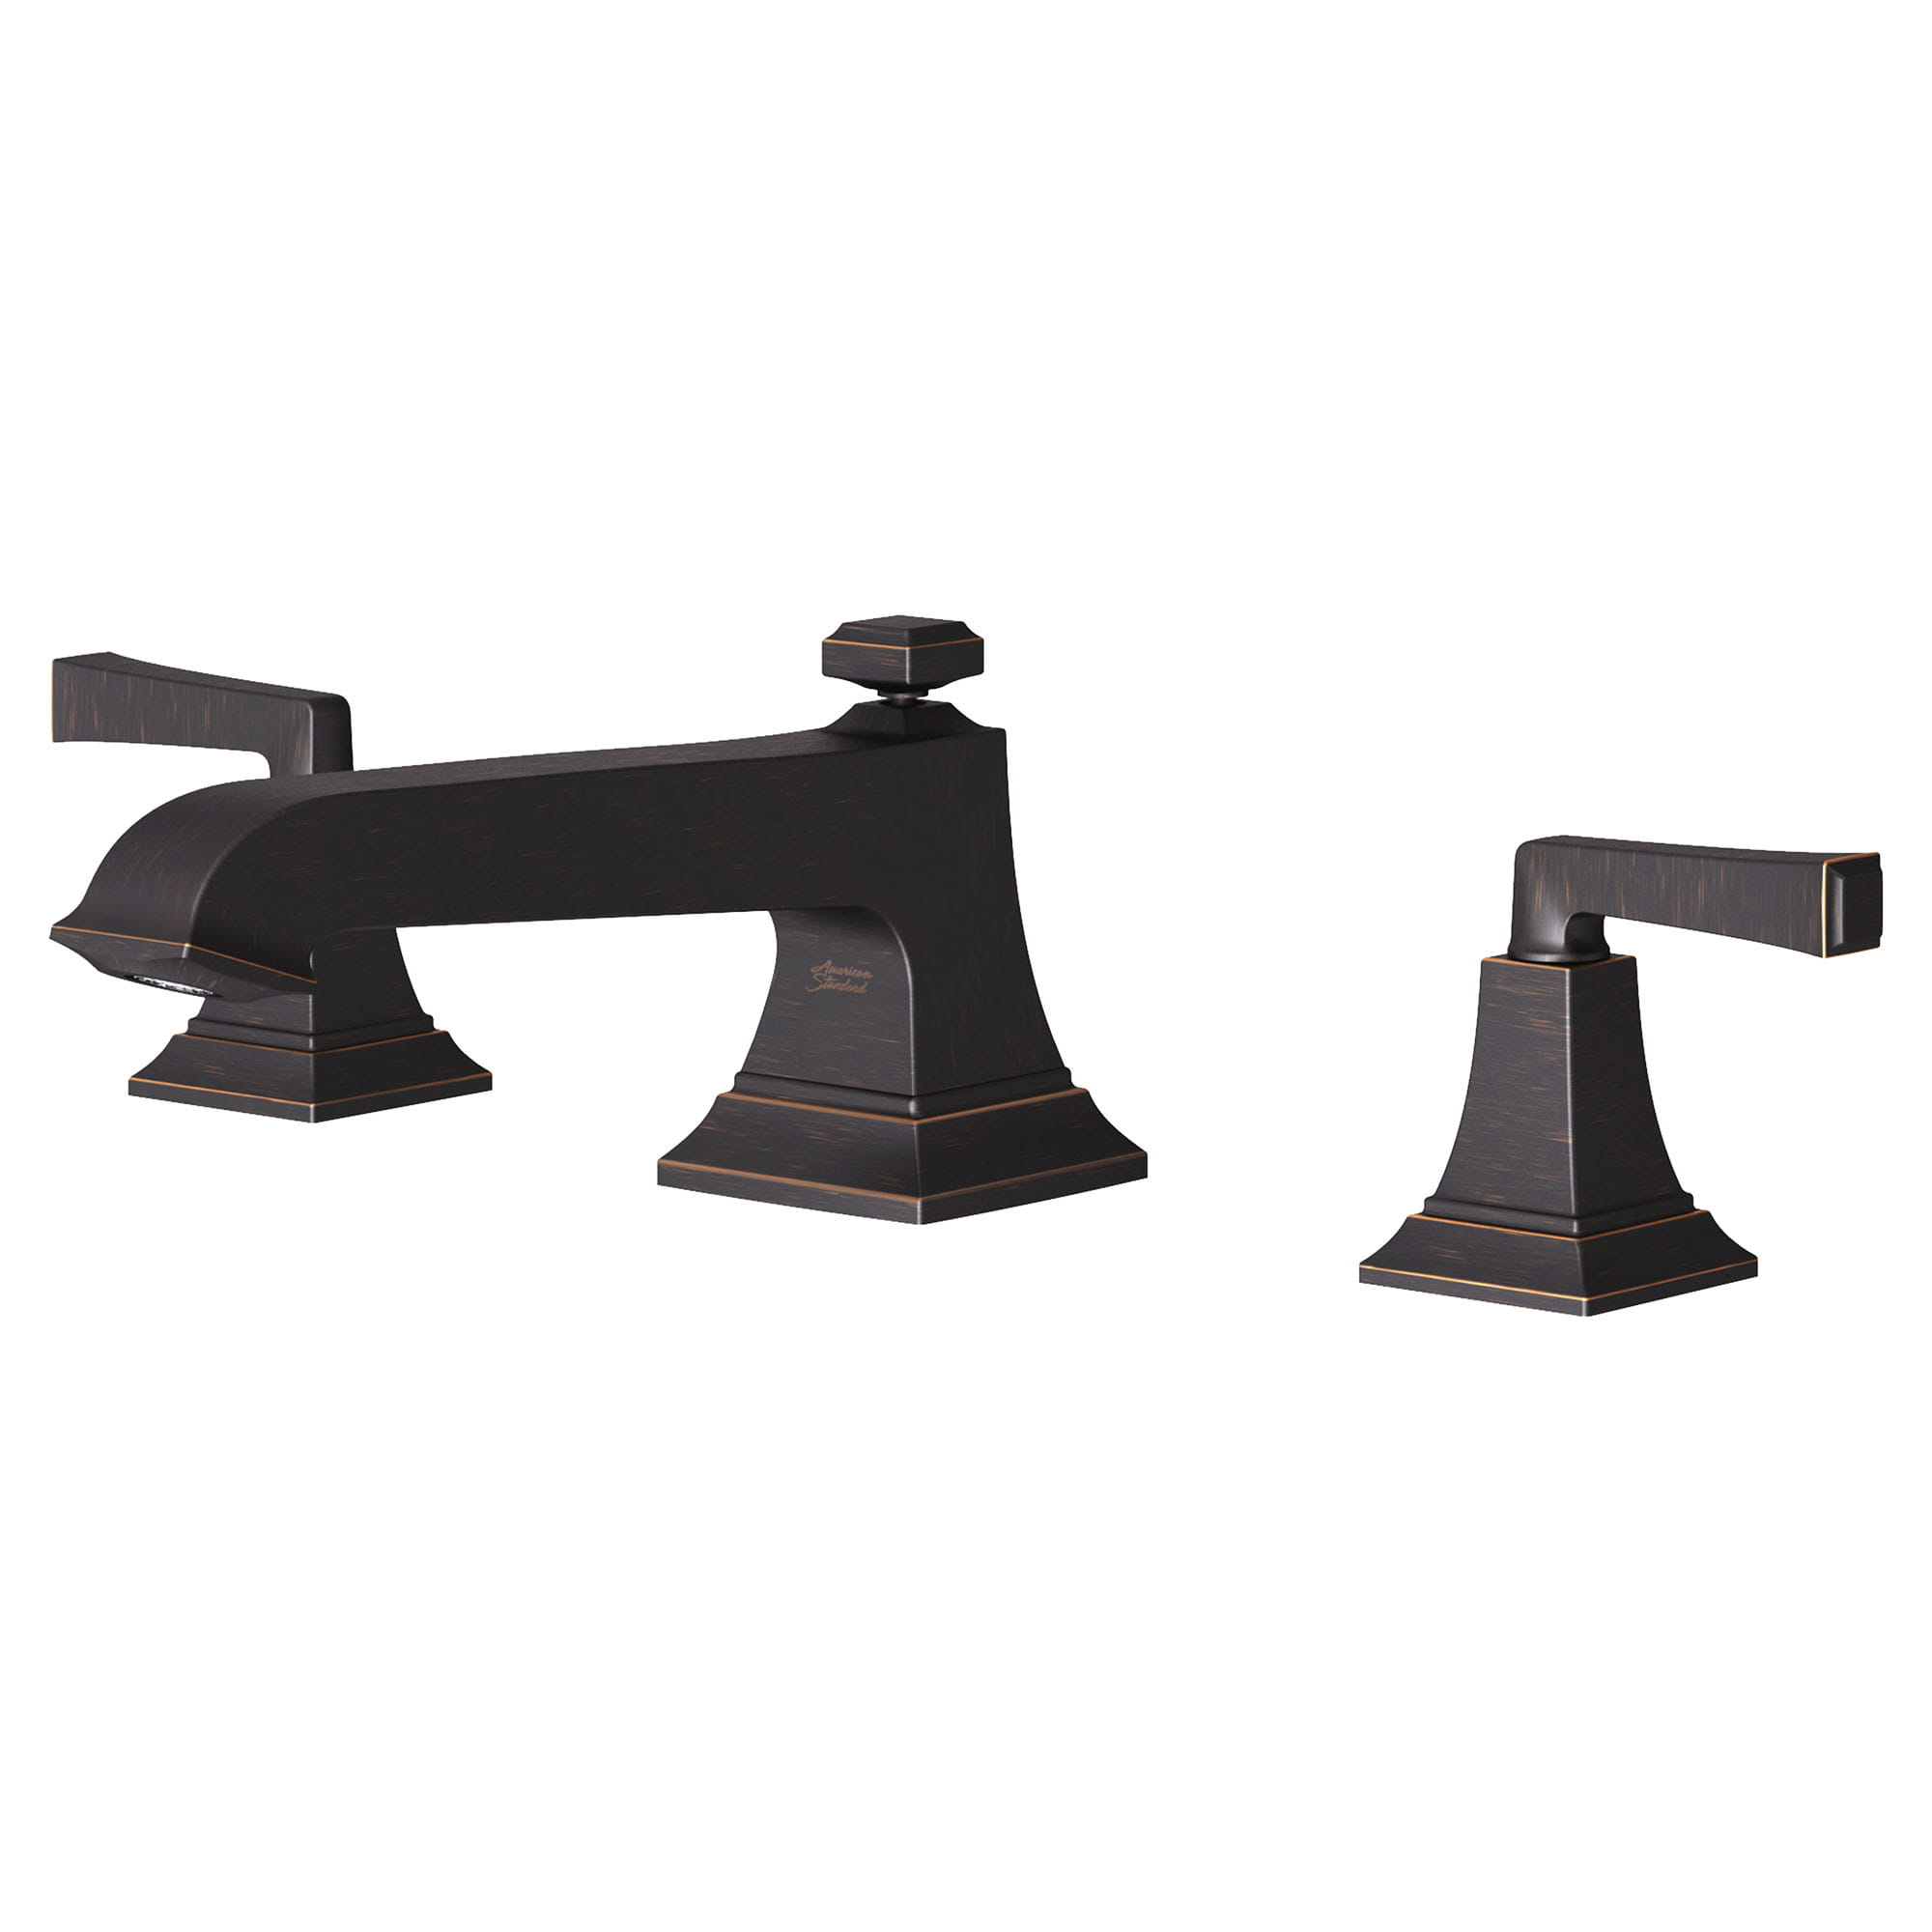 Town Square S Bathub Faucet With Lever Handles for Flash Rough In Valve LEGACY BRONZE